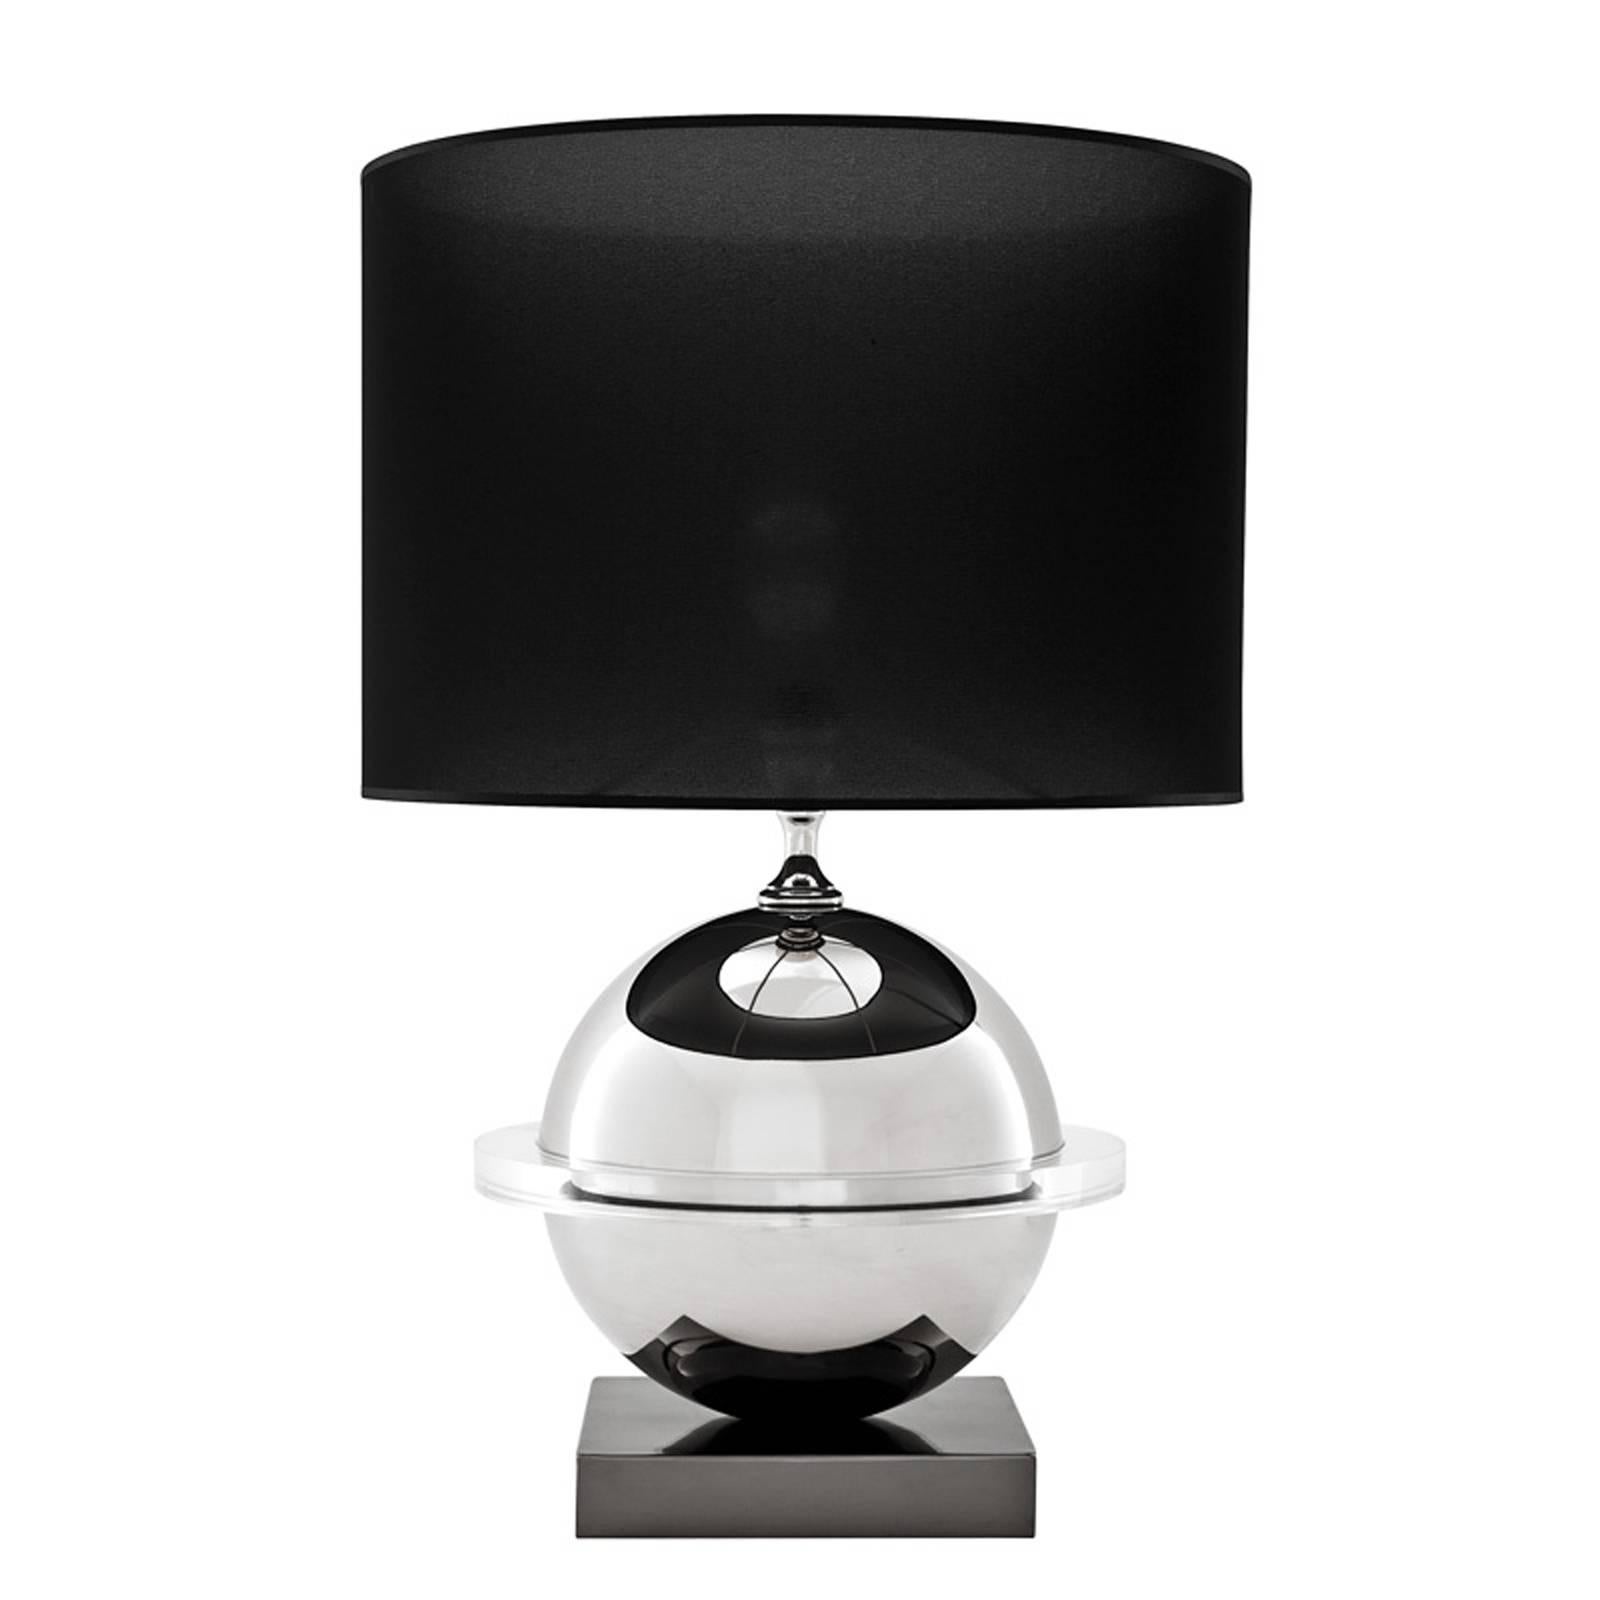 Table lamp universe in polished nickel finish 
and clear acrylic on black nickel base. Including
black organza shade. Shade dimension: Ø50xH35cm. 
1 bulb lamp holder type E27, 40 watt max. 
Bulb not included.
